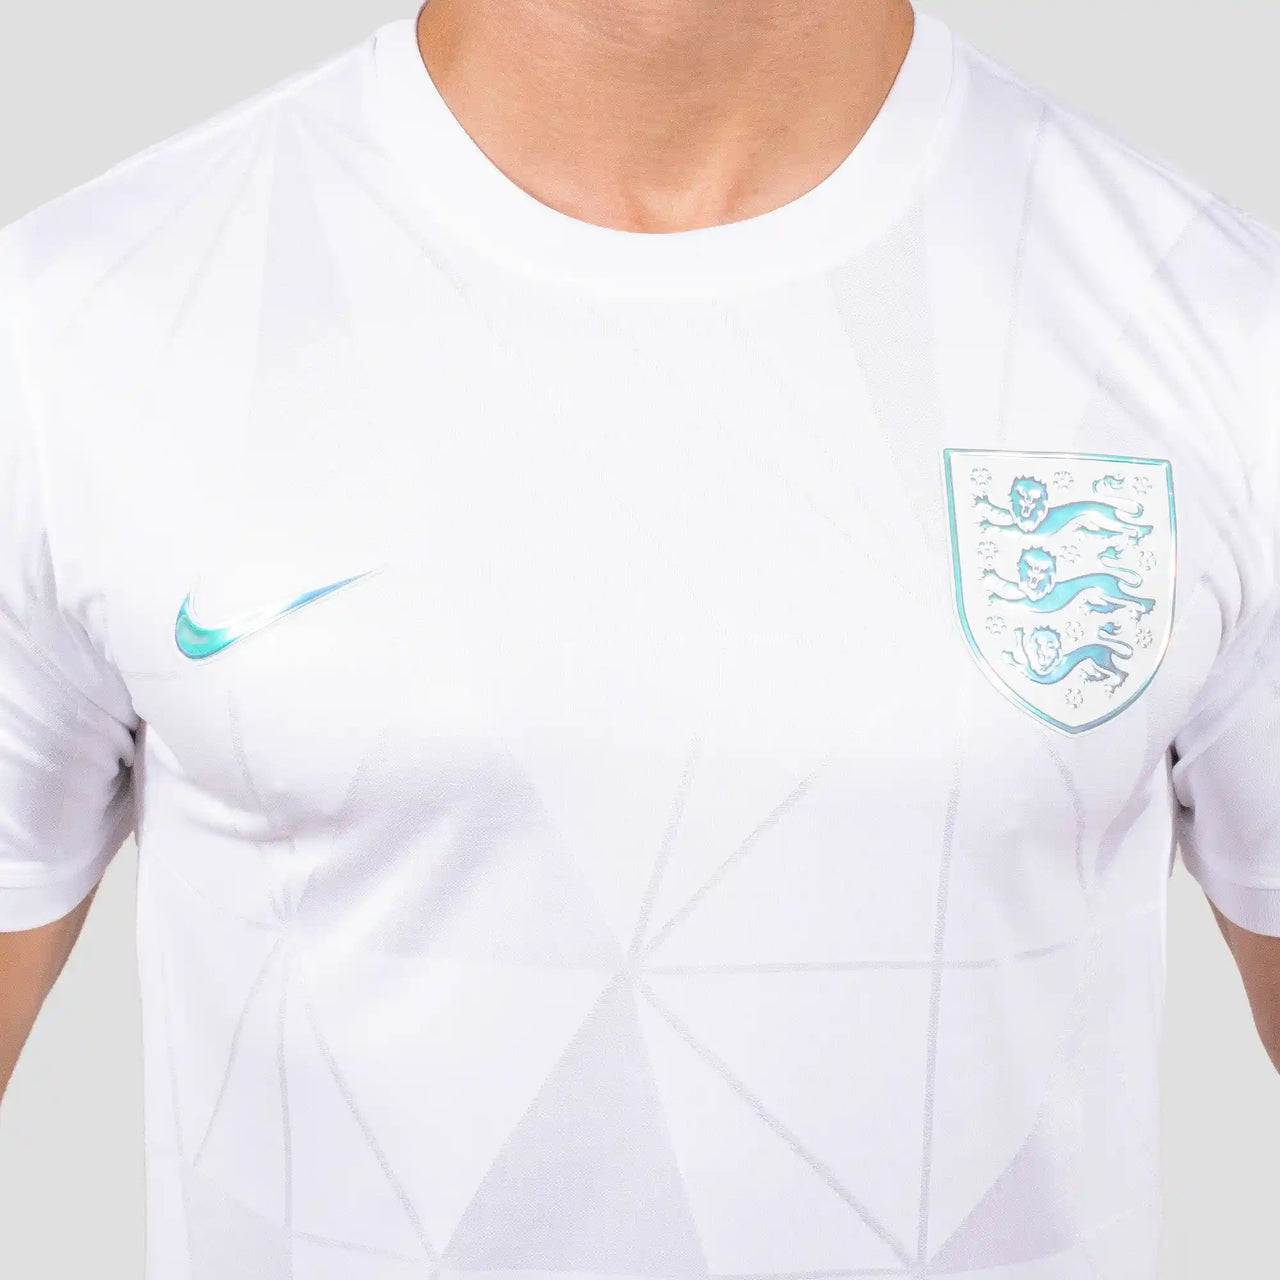 Maillot blanc complet Angleterre 22/23 pour hommes